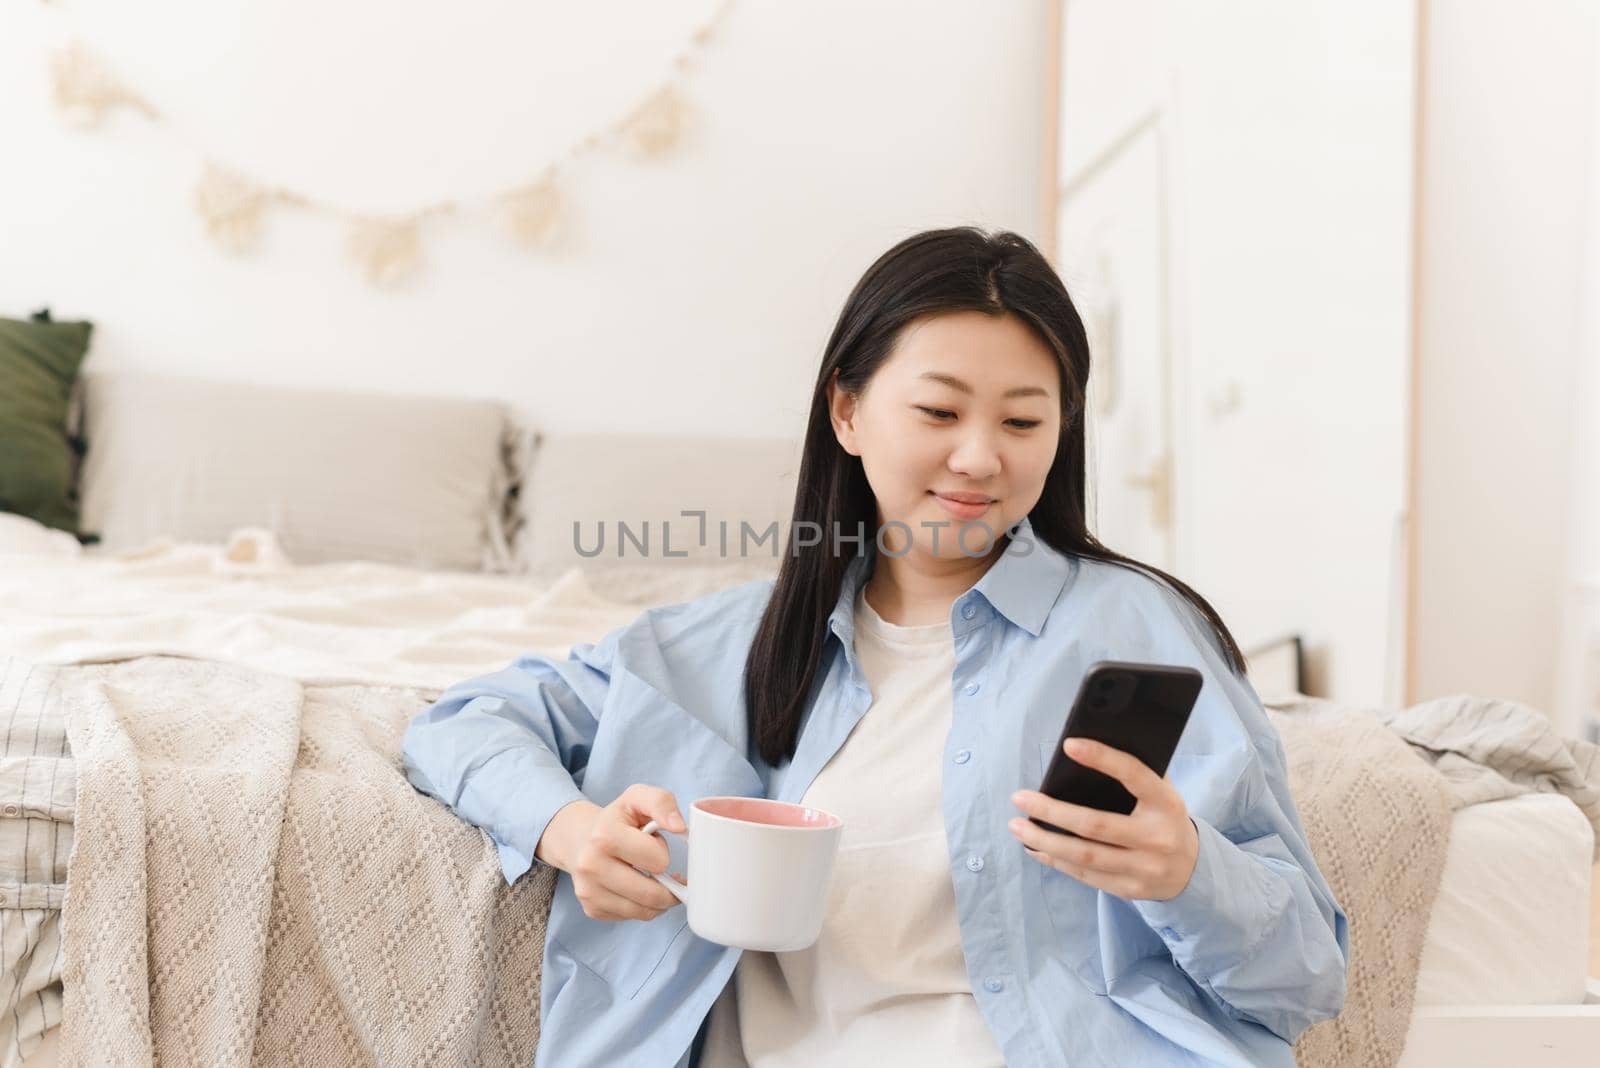 A portrait of a beautiful young Asian woman with a happy smile drinks morning coffee and looks at the mobile phone, sitting on the floor by the bed in the interior of the bedroom.